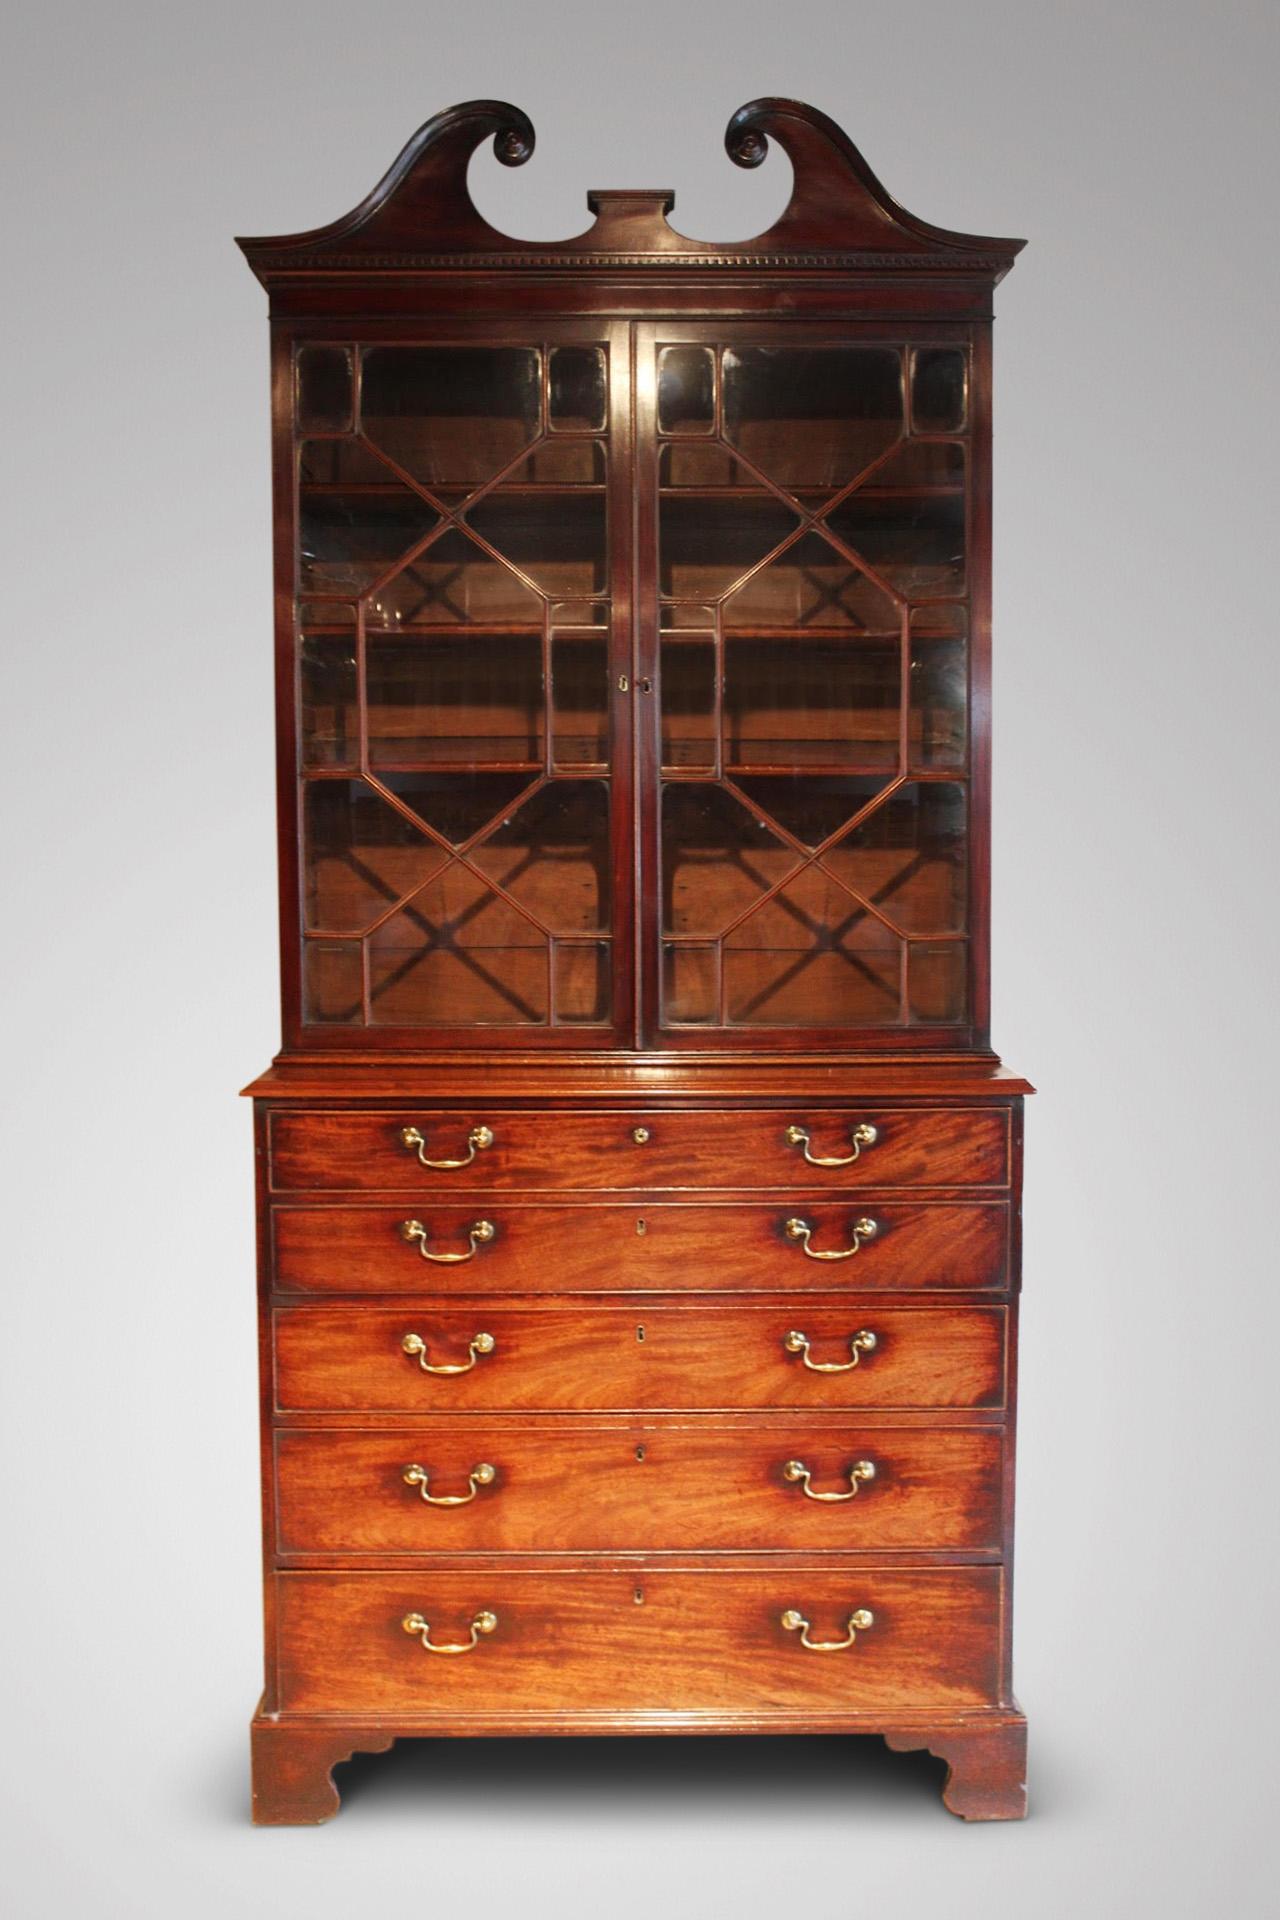 A late 18th century quality Georgian period mahogany secretaire bookcase retaining the original patina. Moulded pediment cornice above a pair of astragal glazing enclosing three adjustable shelves. The flamed mahogany secretaire drawer opens to